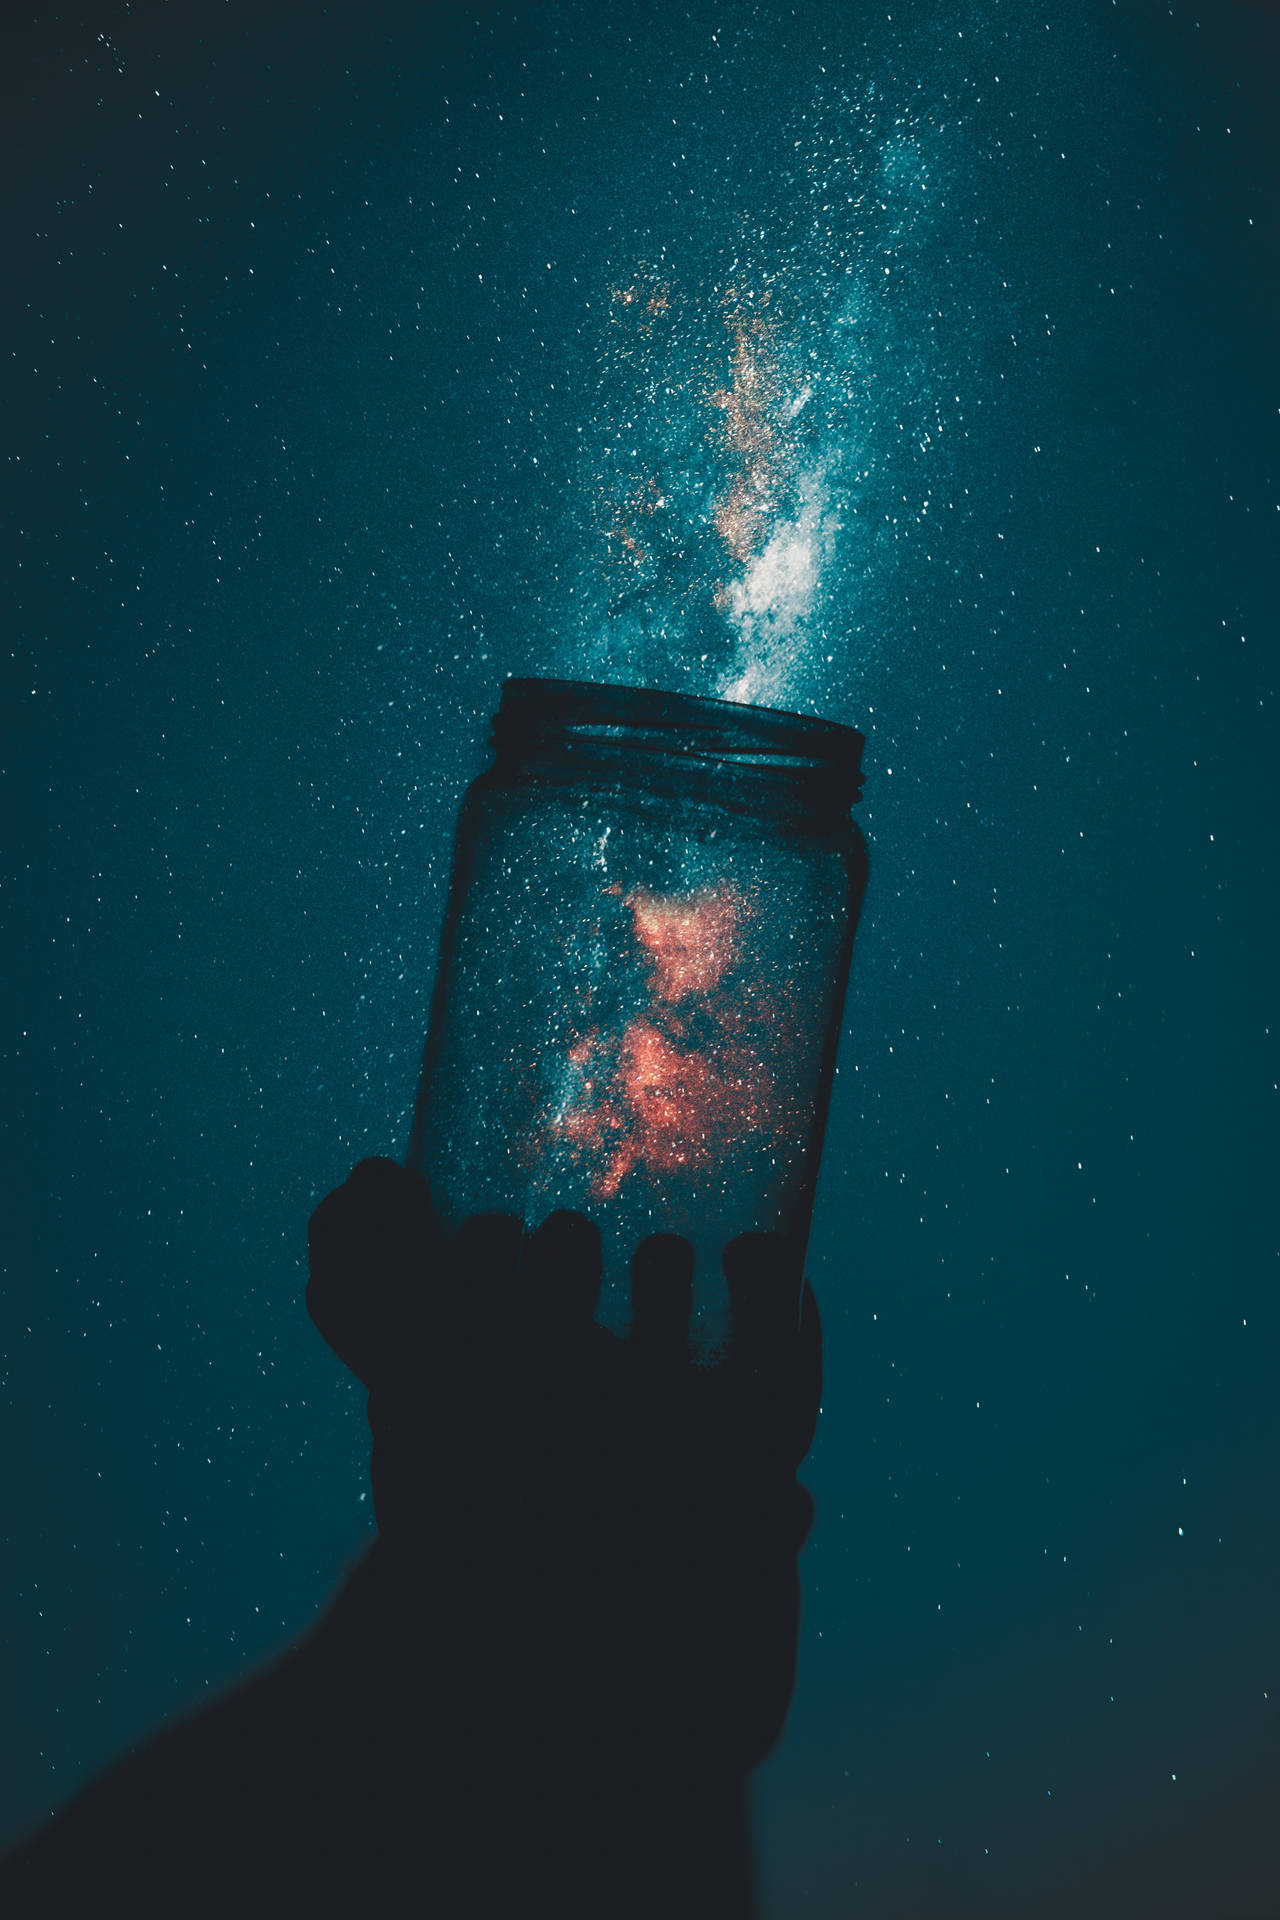 Android Galaxy In Jar Wallpaper